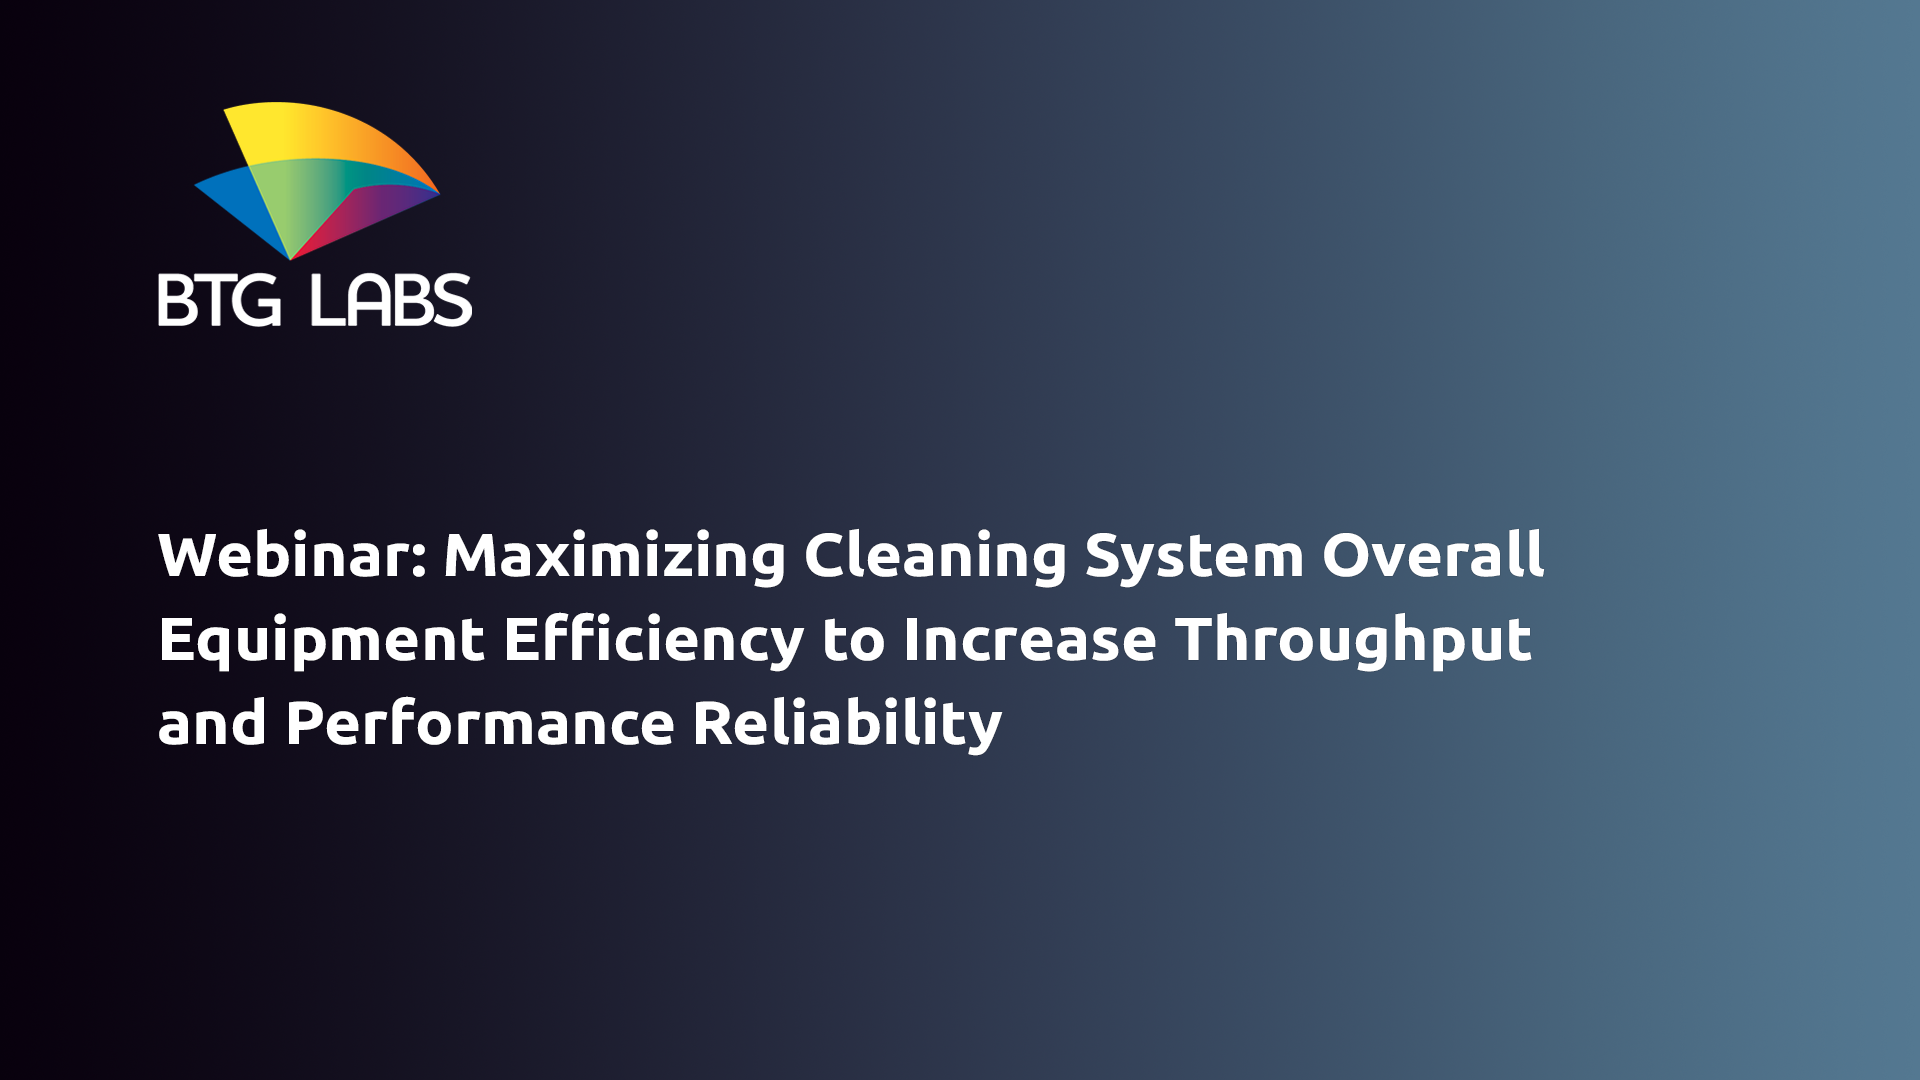 Maximizing Cleaning System Overall Equipment Efficiency to Increase Throughput and Performance Reliability